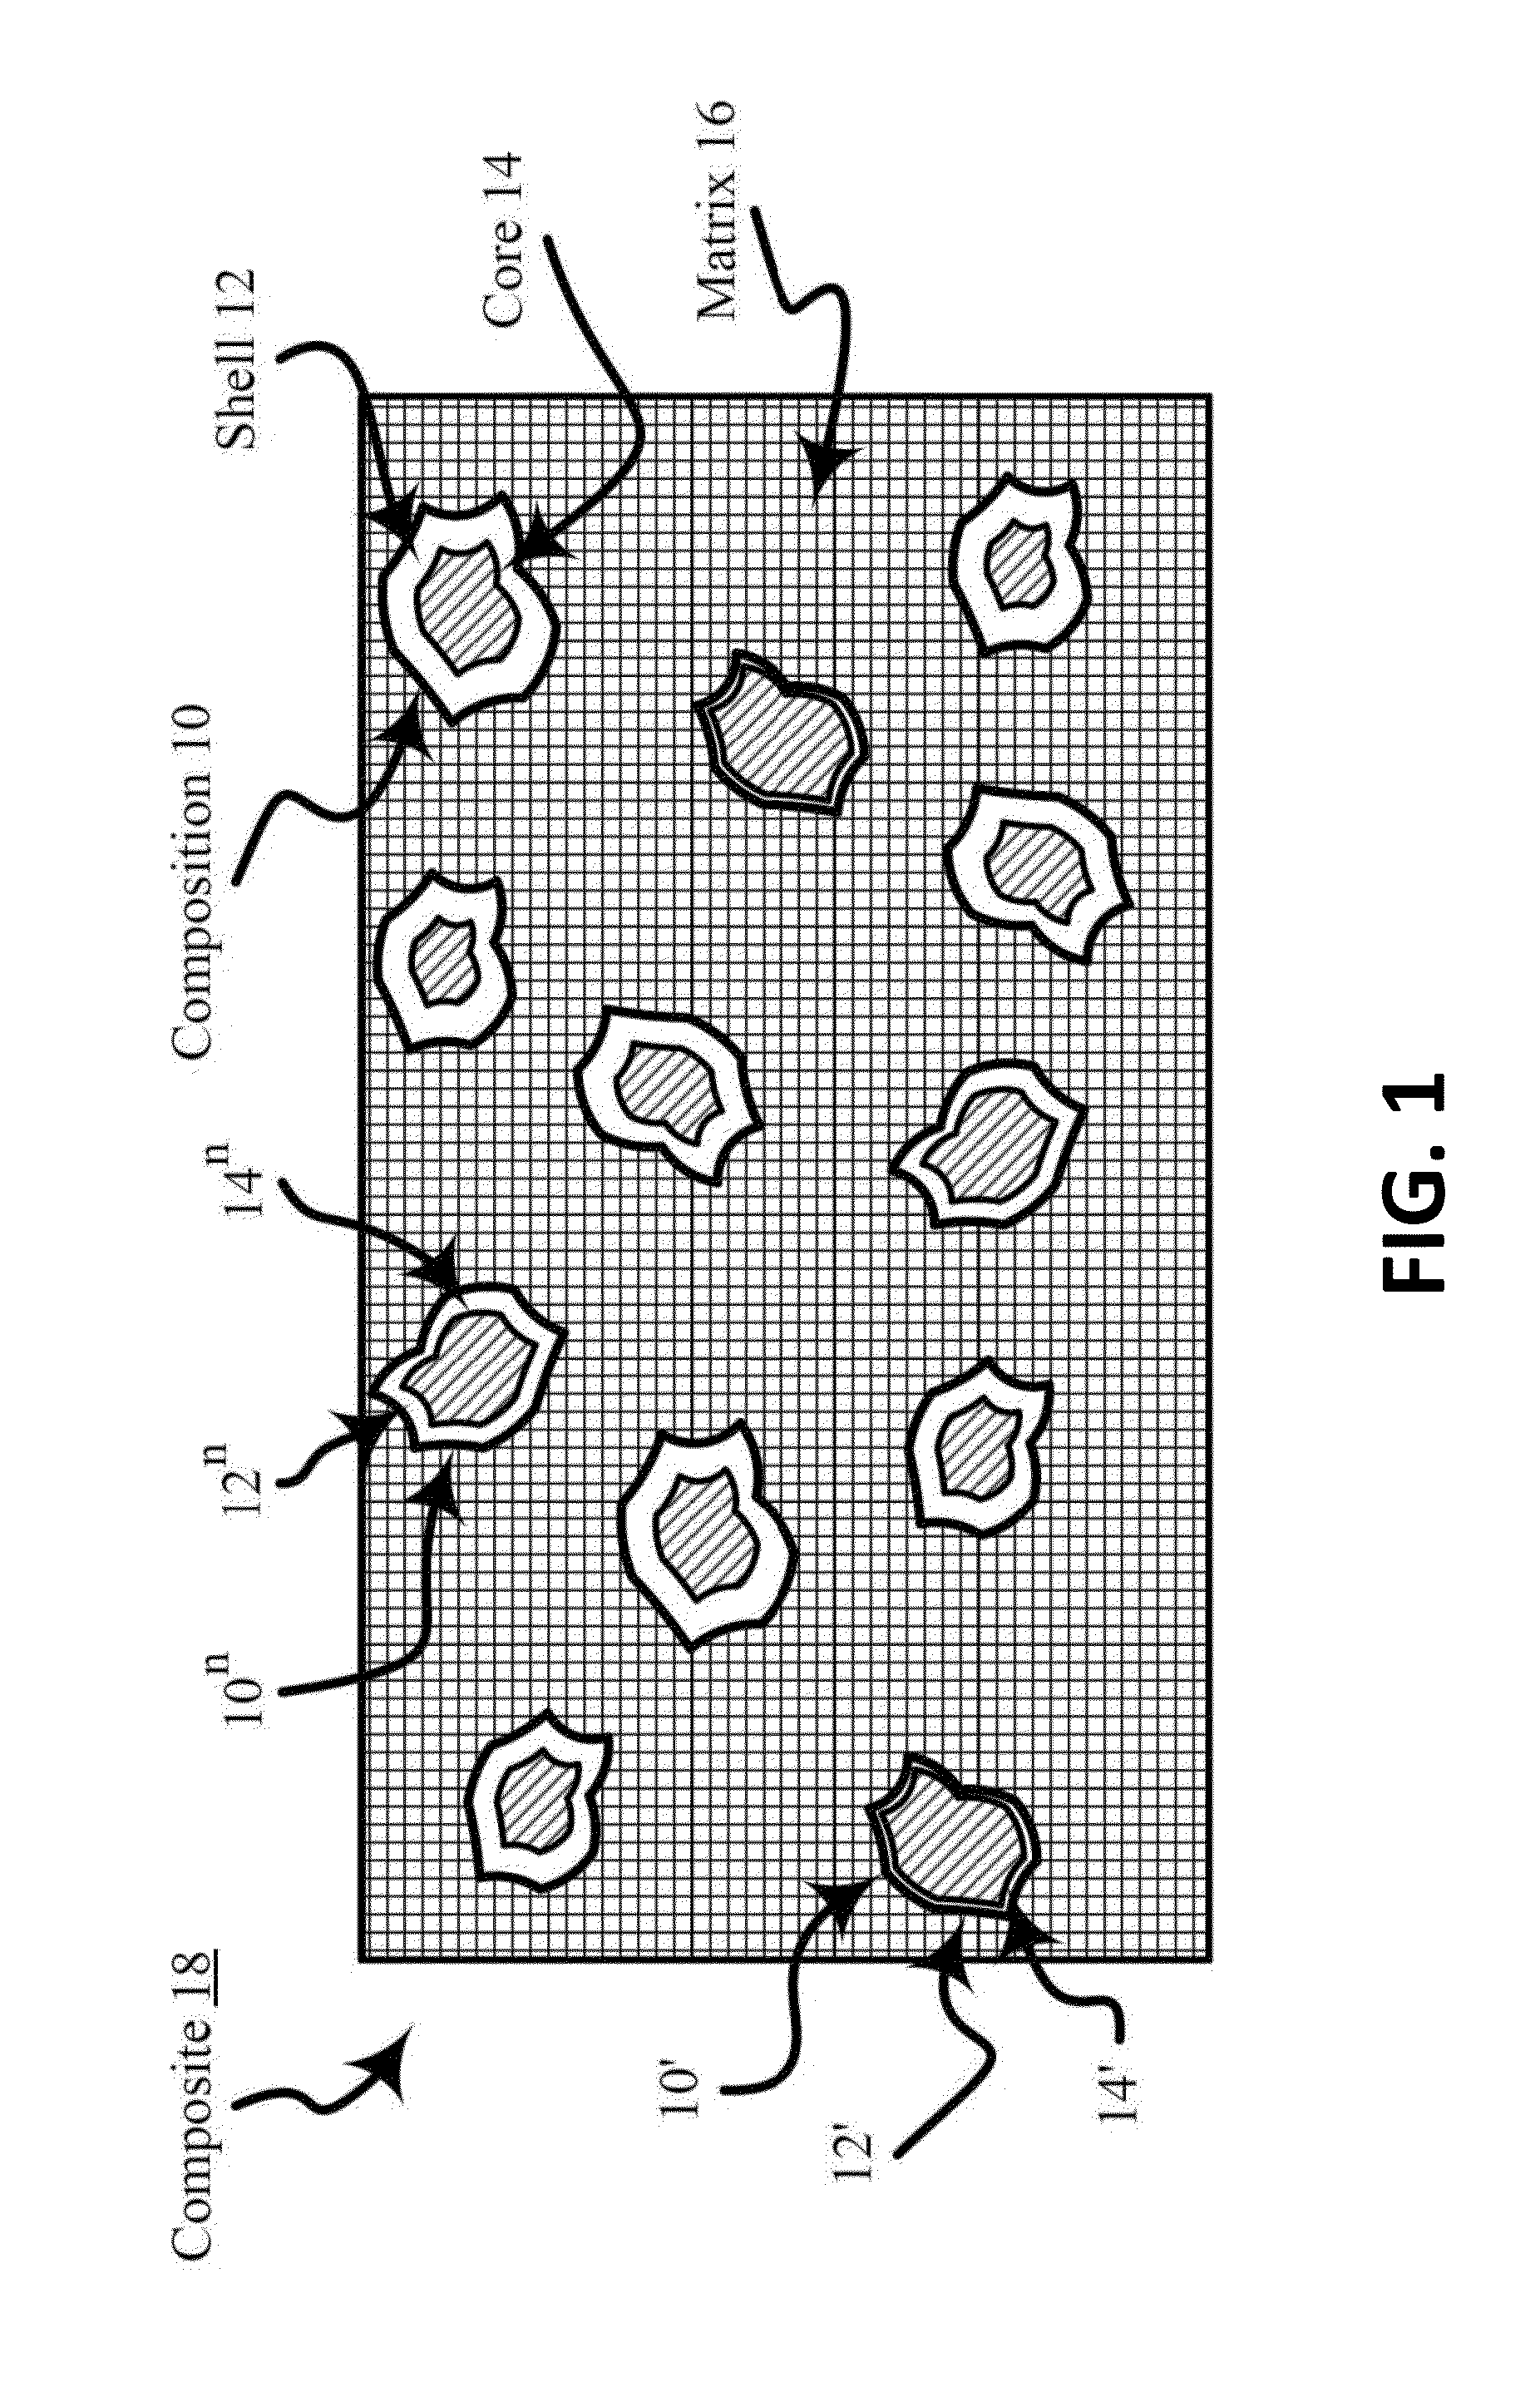 Electrocatalytic composite(s), associated composition(s), and associated process(ES)